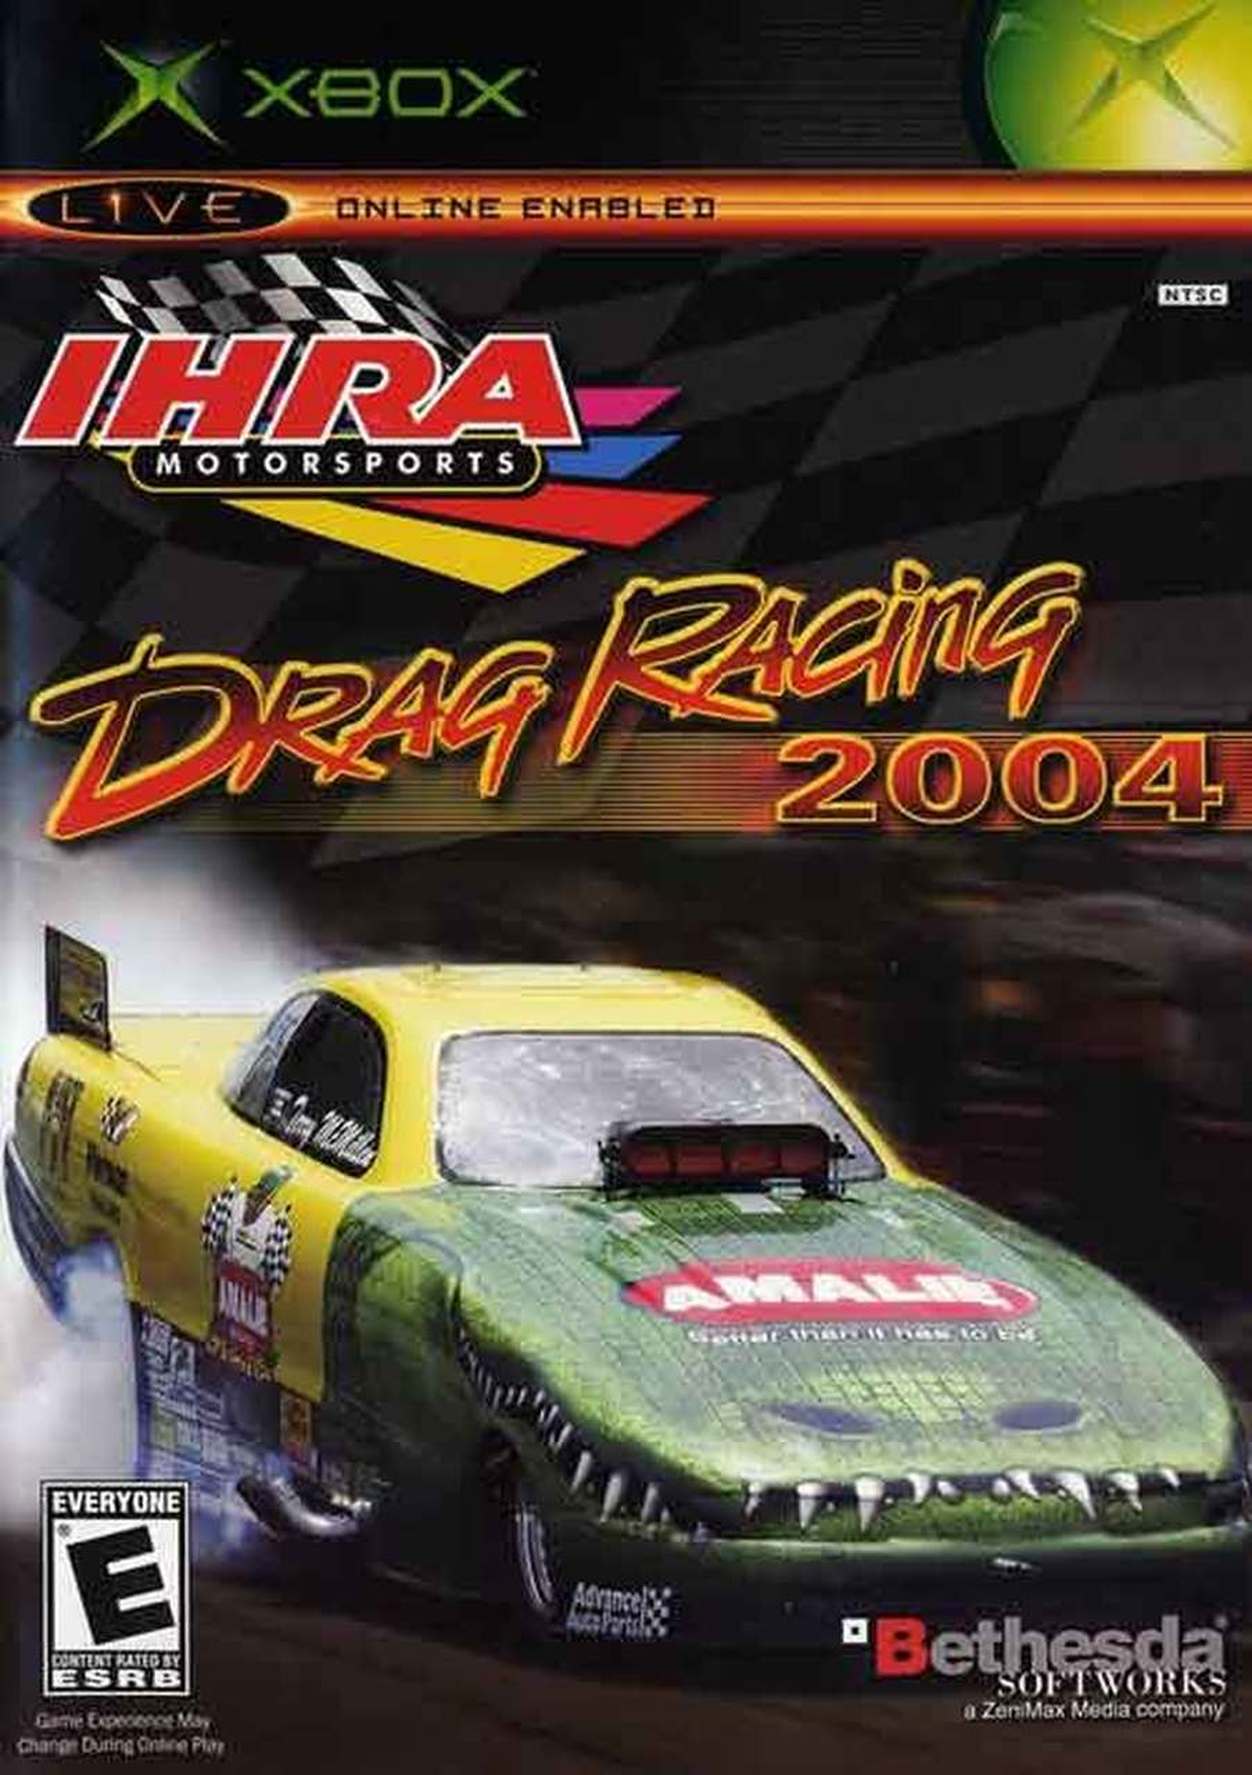 IHRA Drag Racing 2004 player count stats